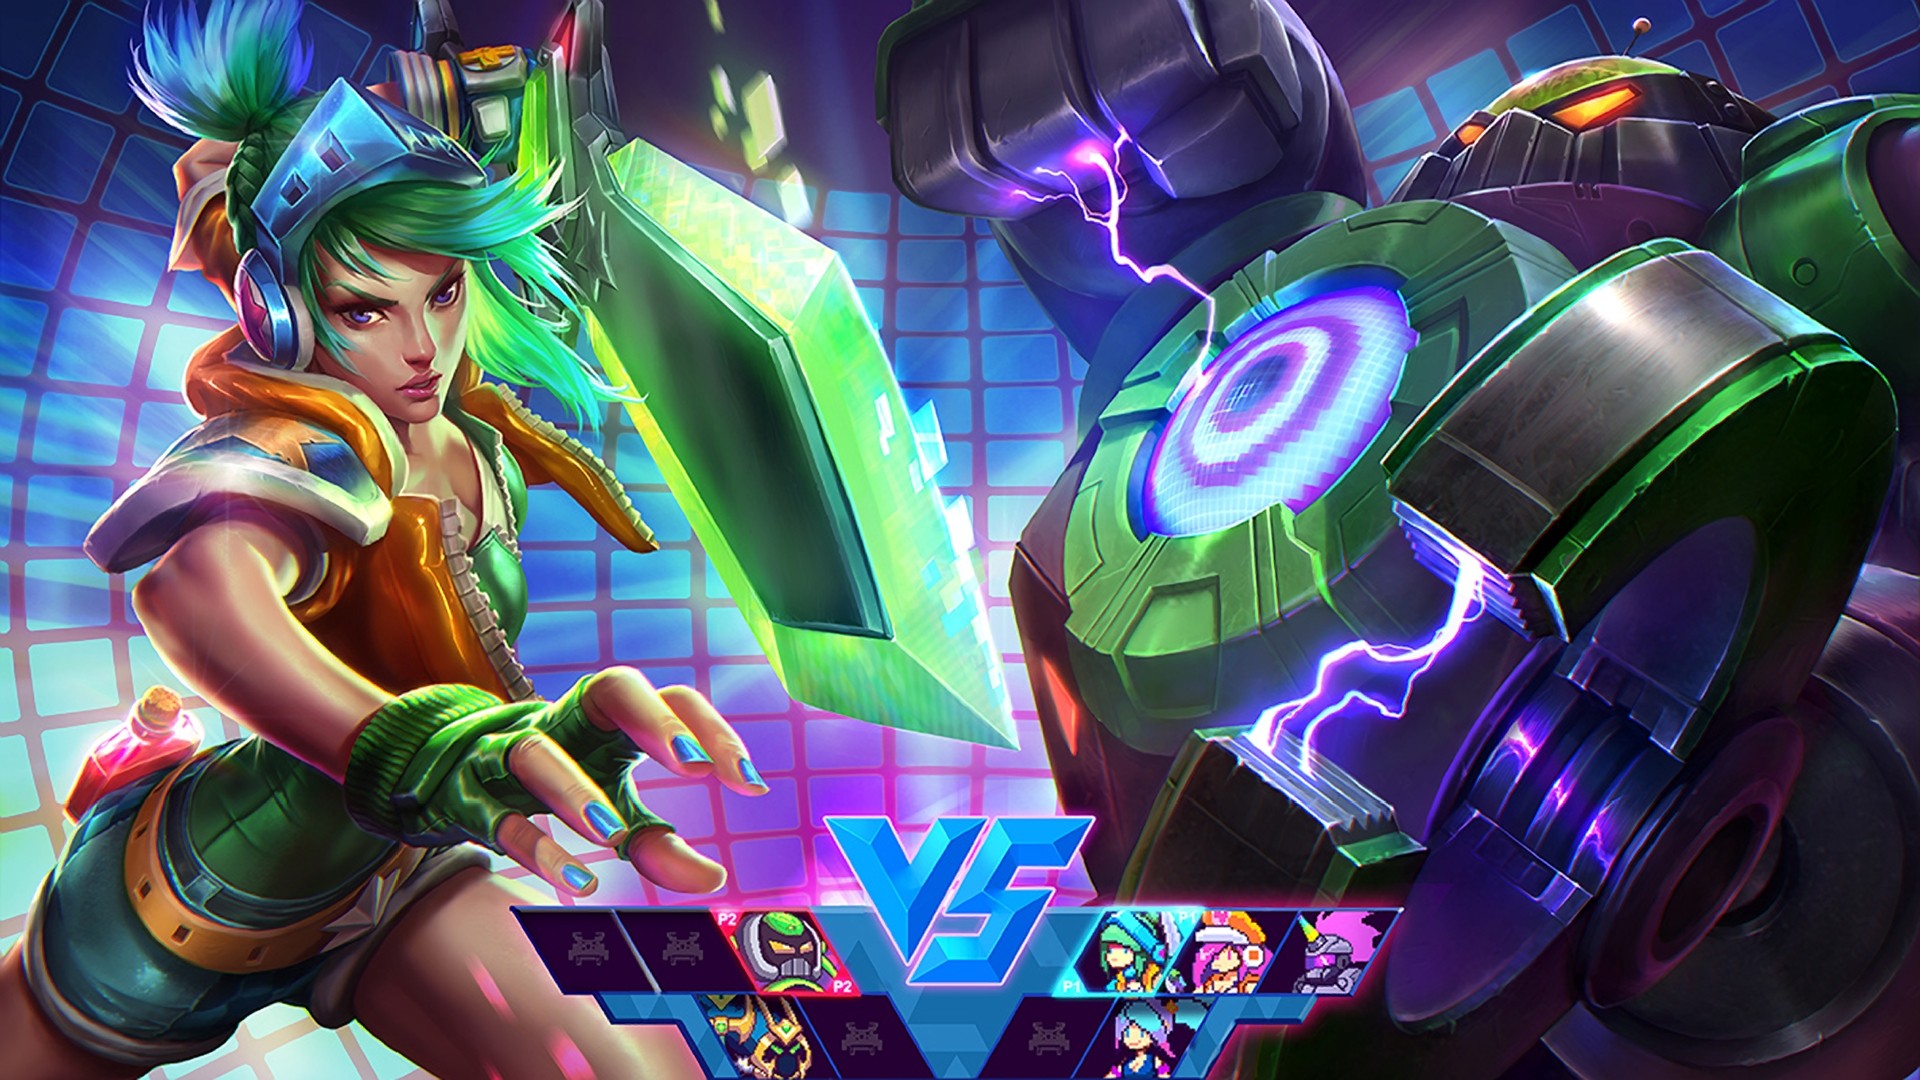 General 1920x1080 League of Legends Riven (League of Legends) Blitzcrank (League of Legends) video game girls green hair cyan nails sword weapon women with swords PC gaming